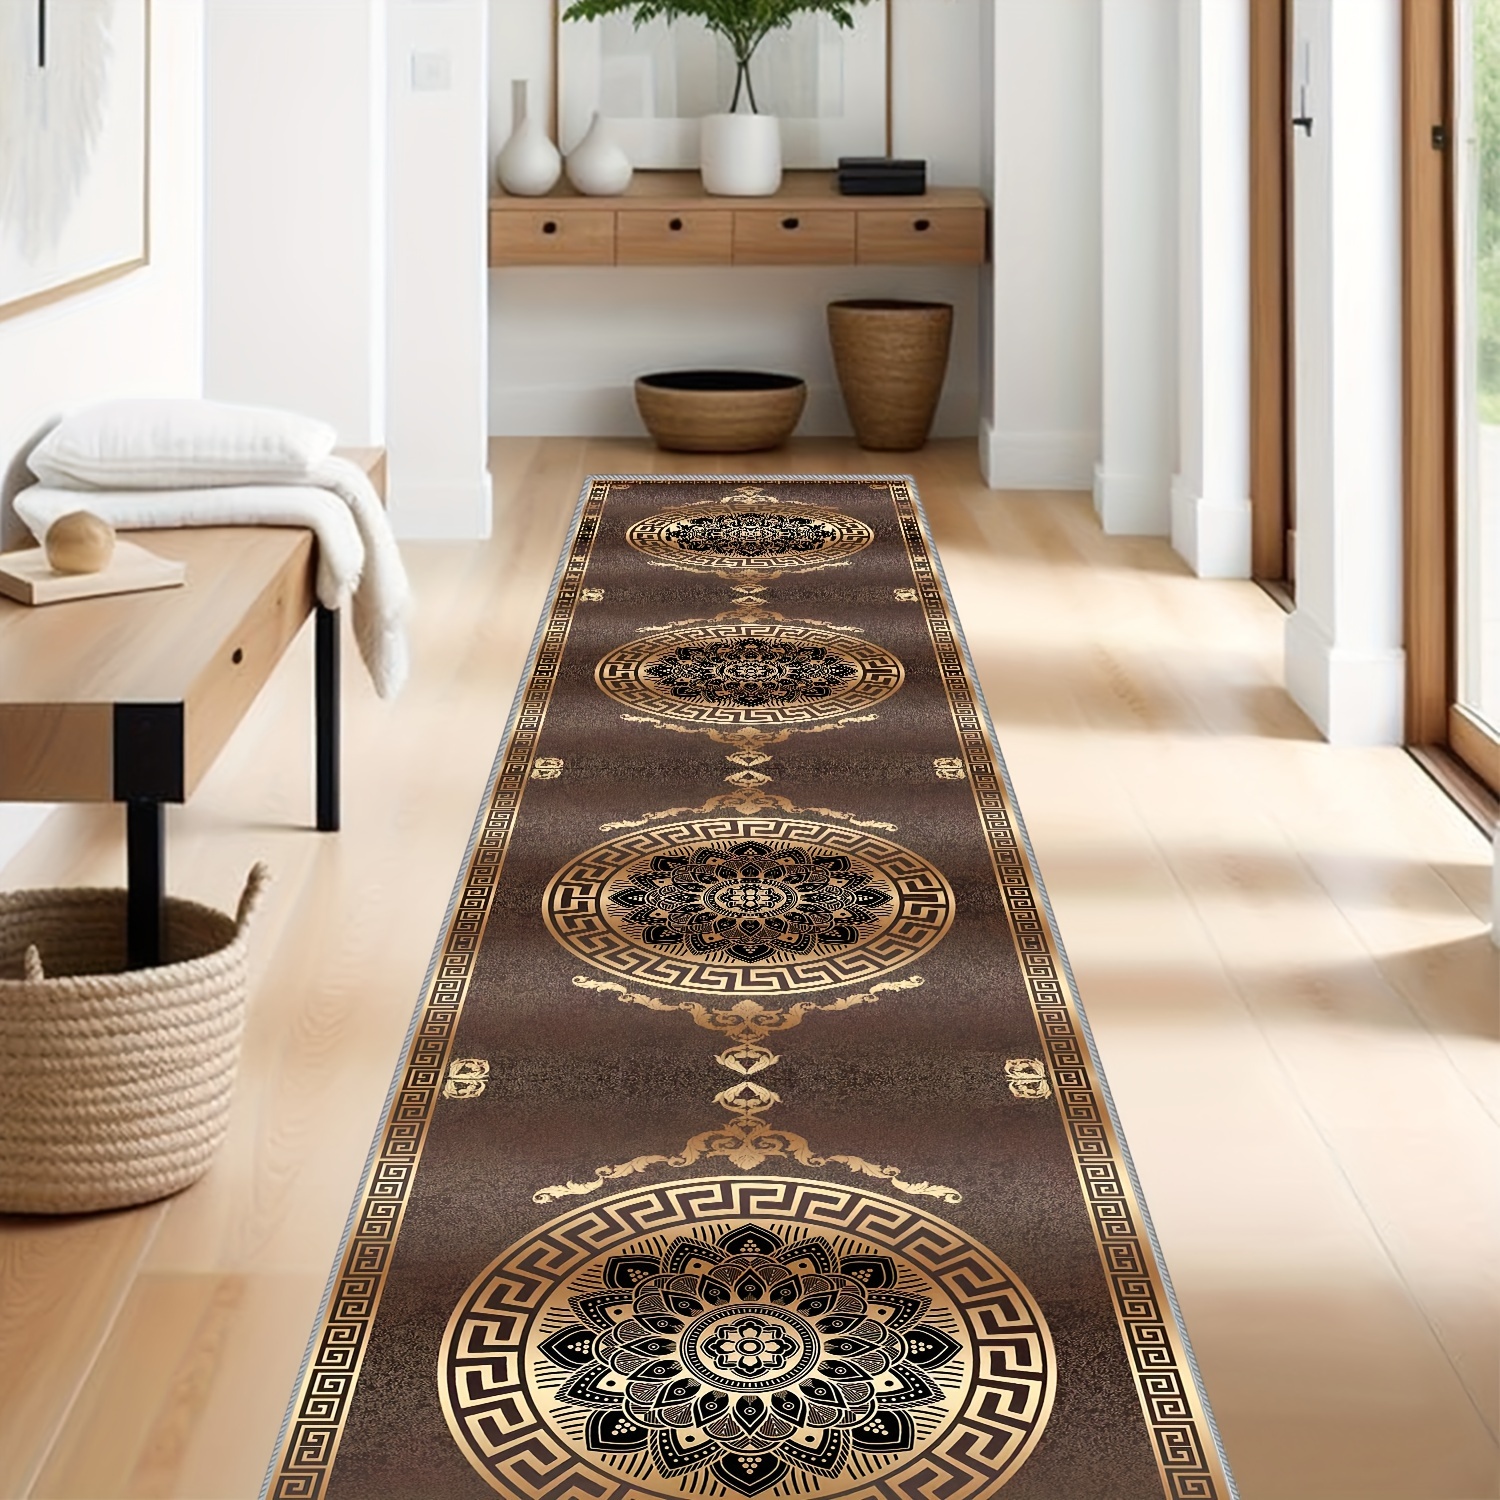 

Luxury Modern Hallway Runner Rug 850g Crystal Velvet 0.8cm Thick Non-slip Polyester Floor Mat, Water And Stain Resistant, Machine Washable For Living Room, Bedroom, And Home Office